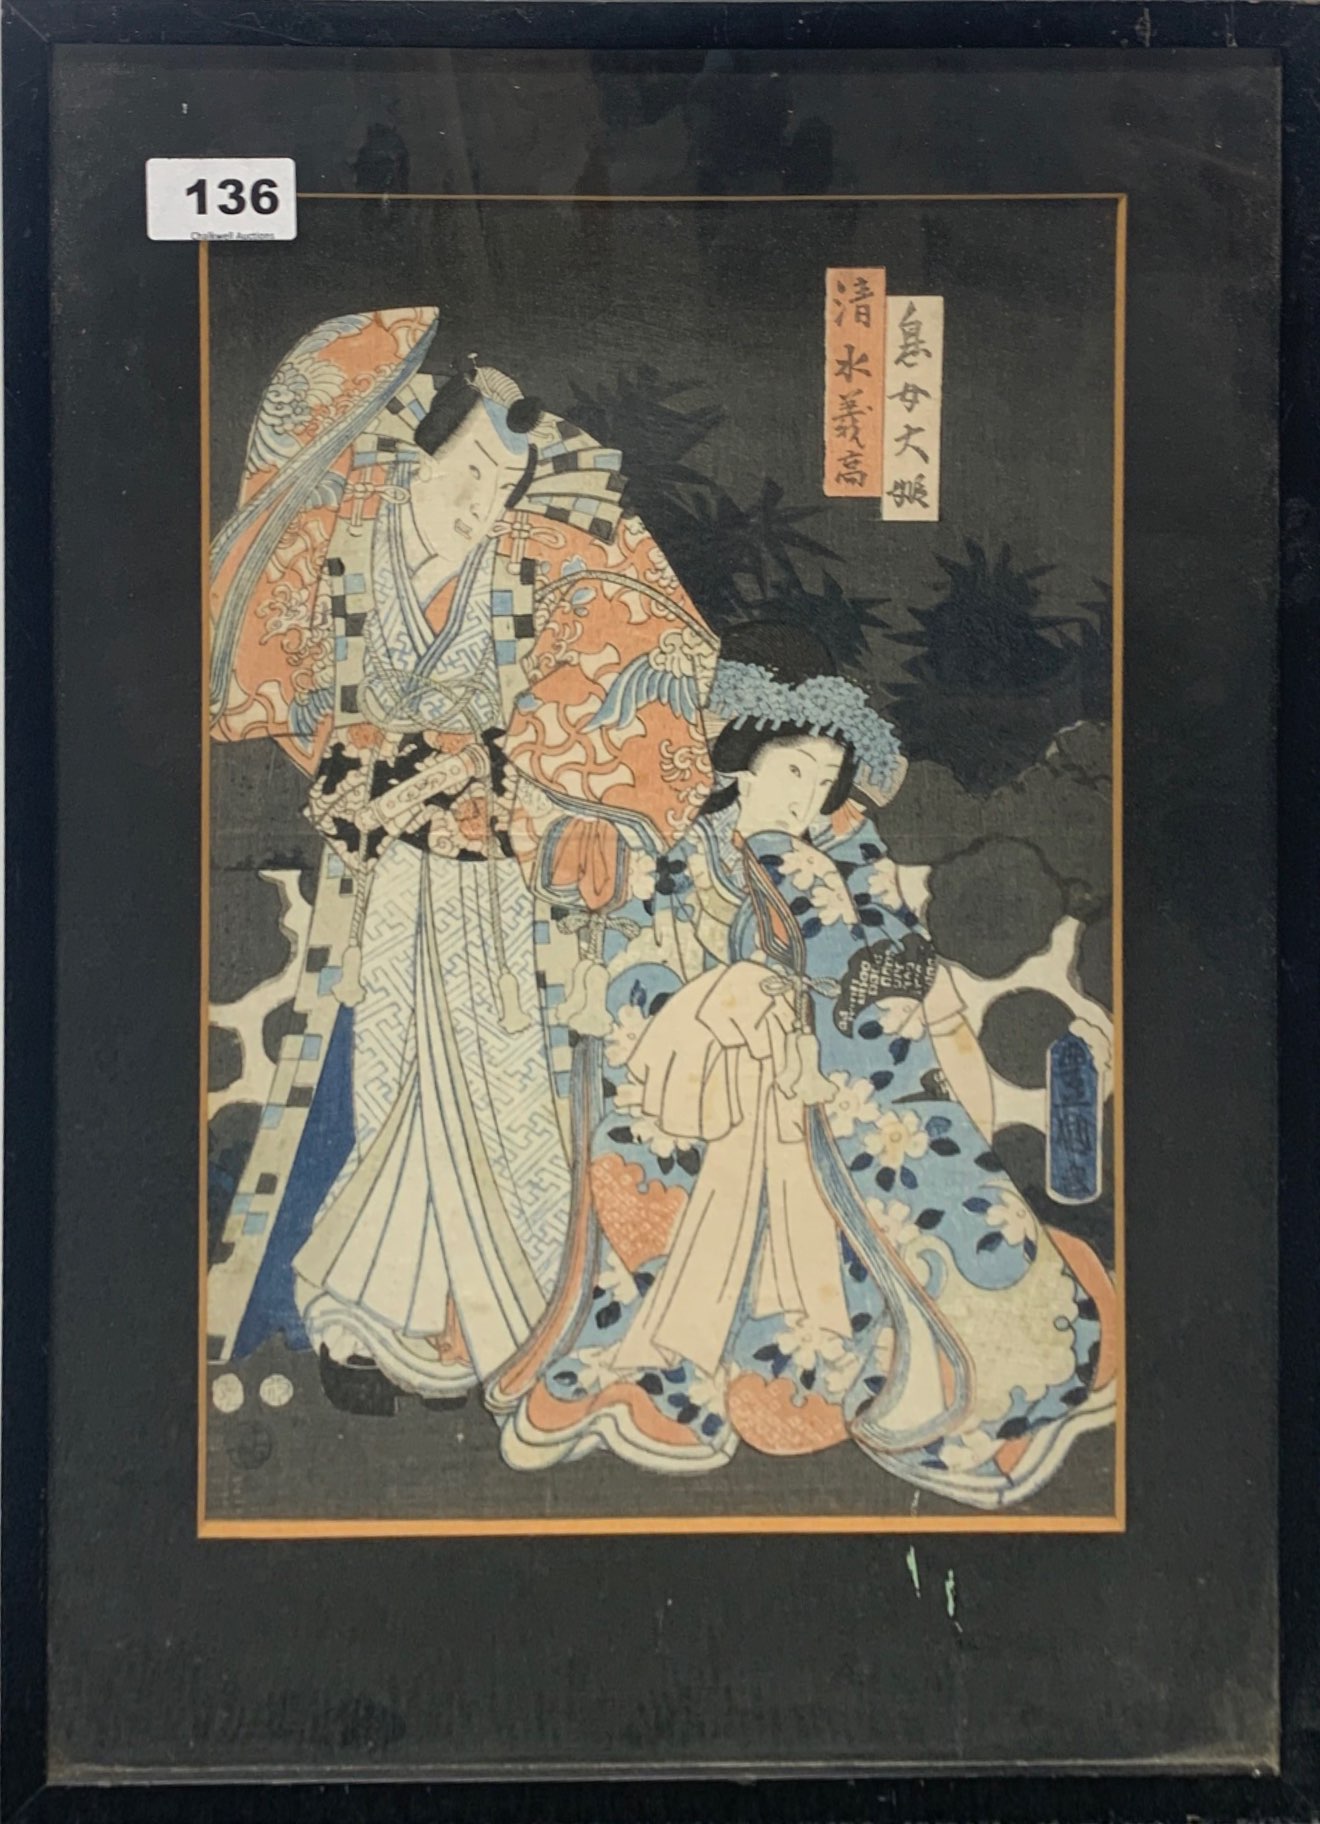 A framed Japanese wood block print of opera characters, frame size 34.5 x 48cm. Provenance: estate